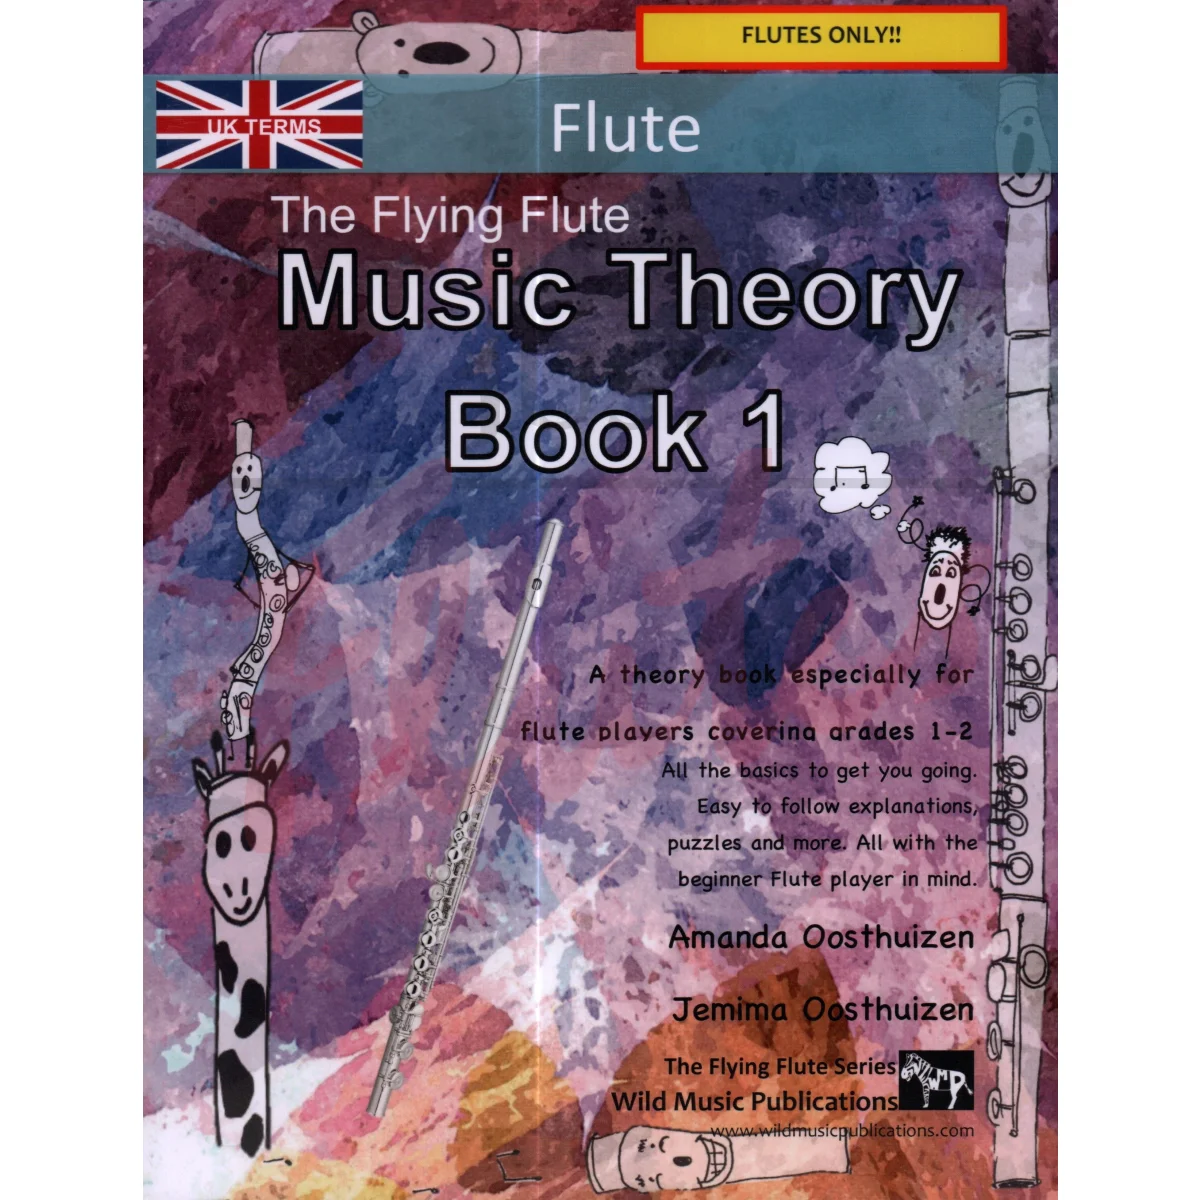 The Flying Flute Music Theory Book 1